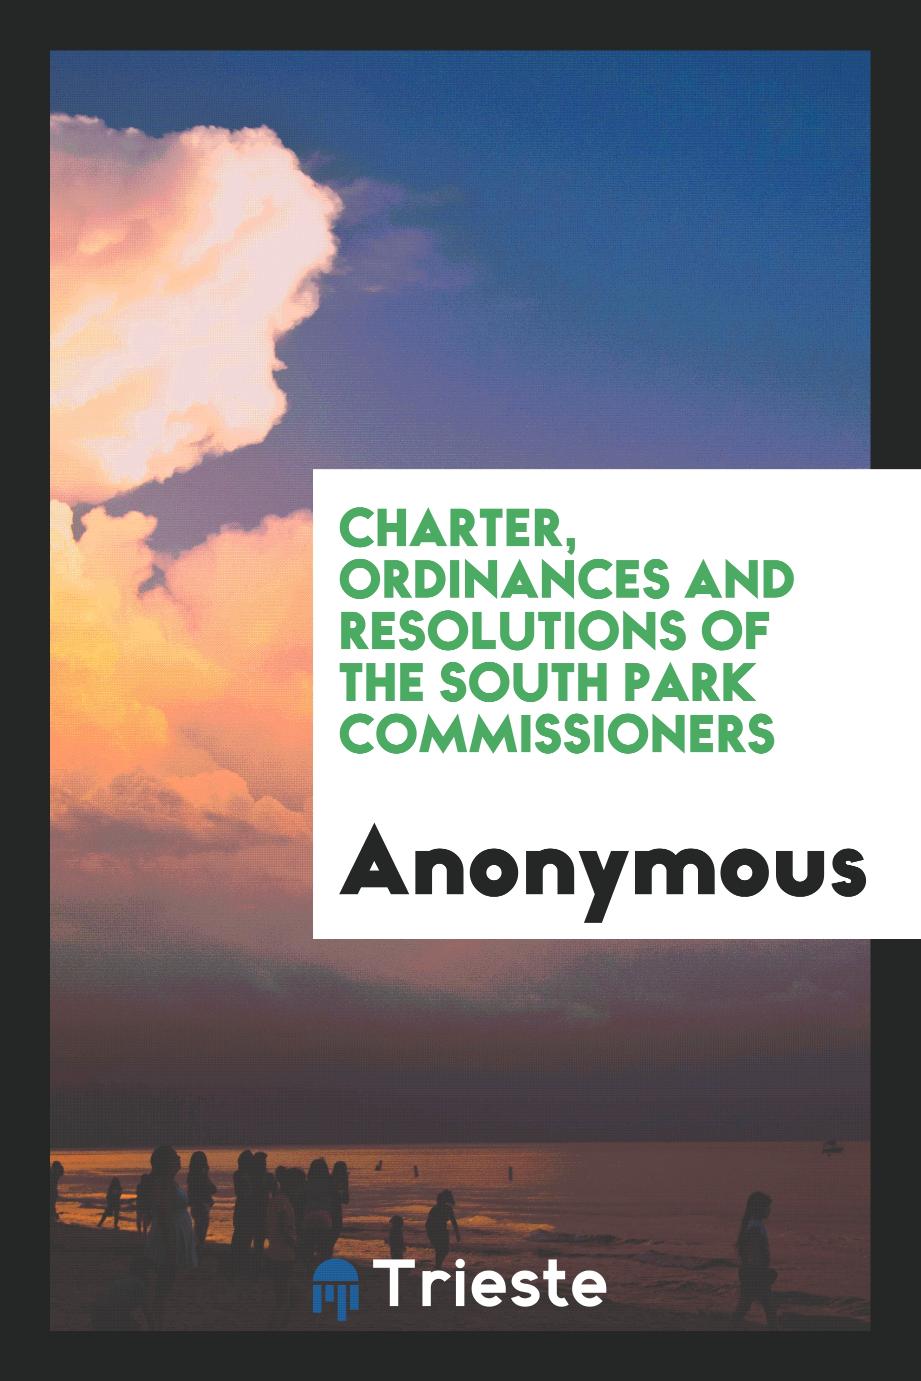 Charter, Ordinances and Resolutions of the South Park Commissioners